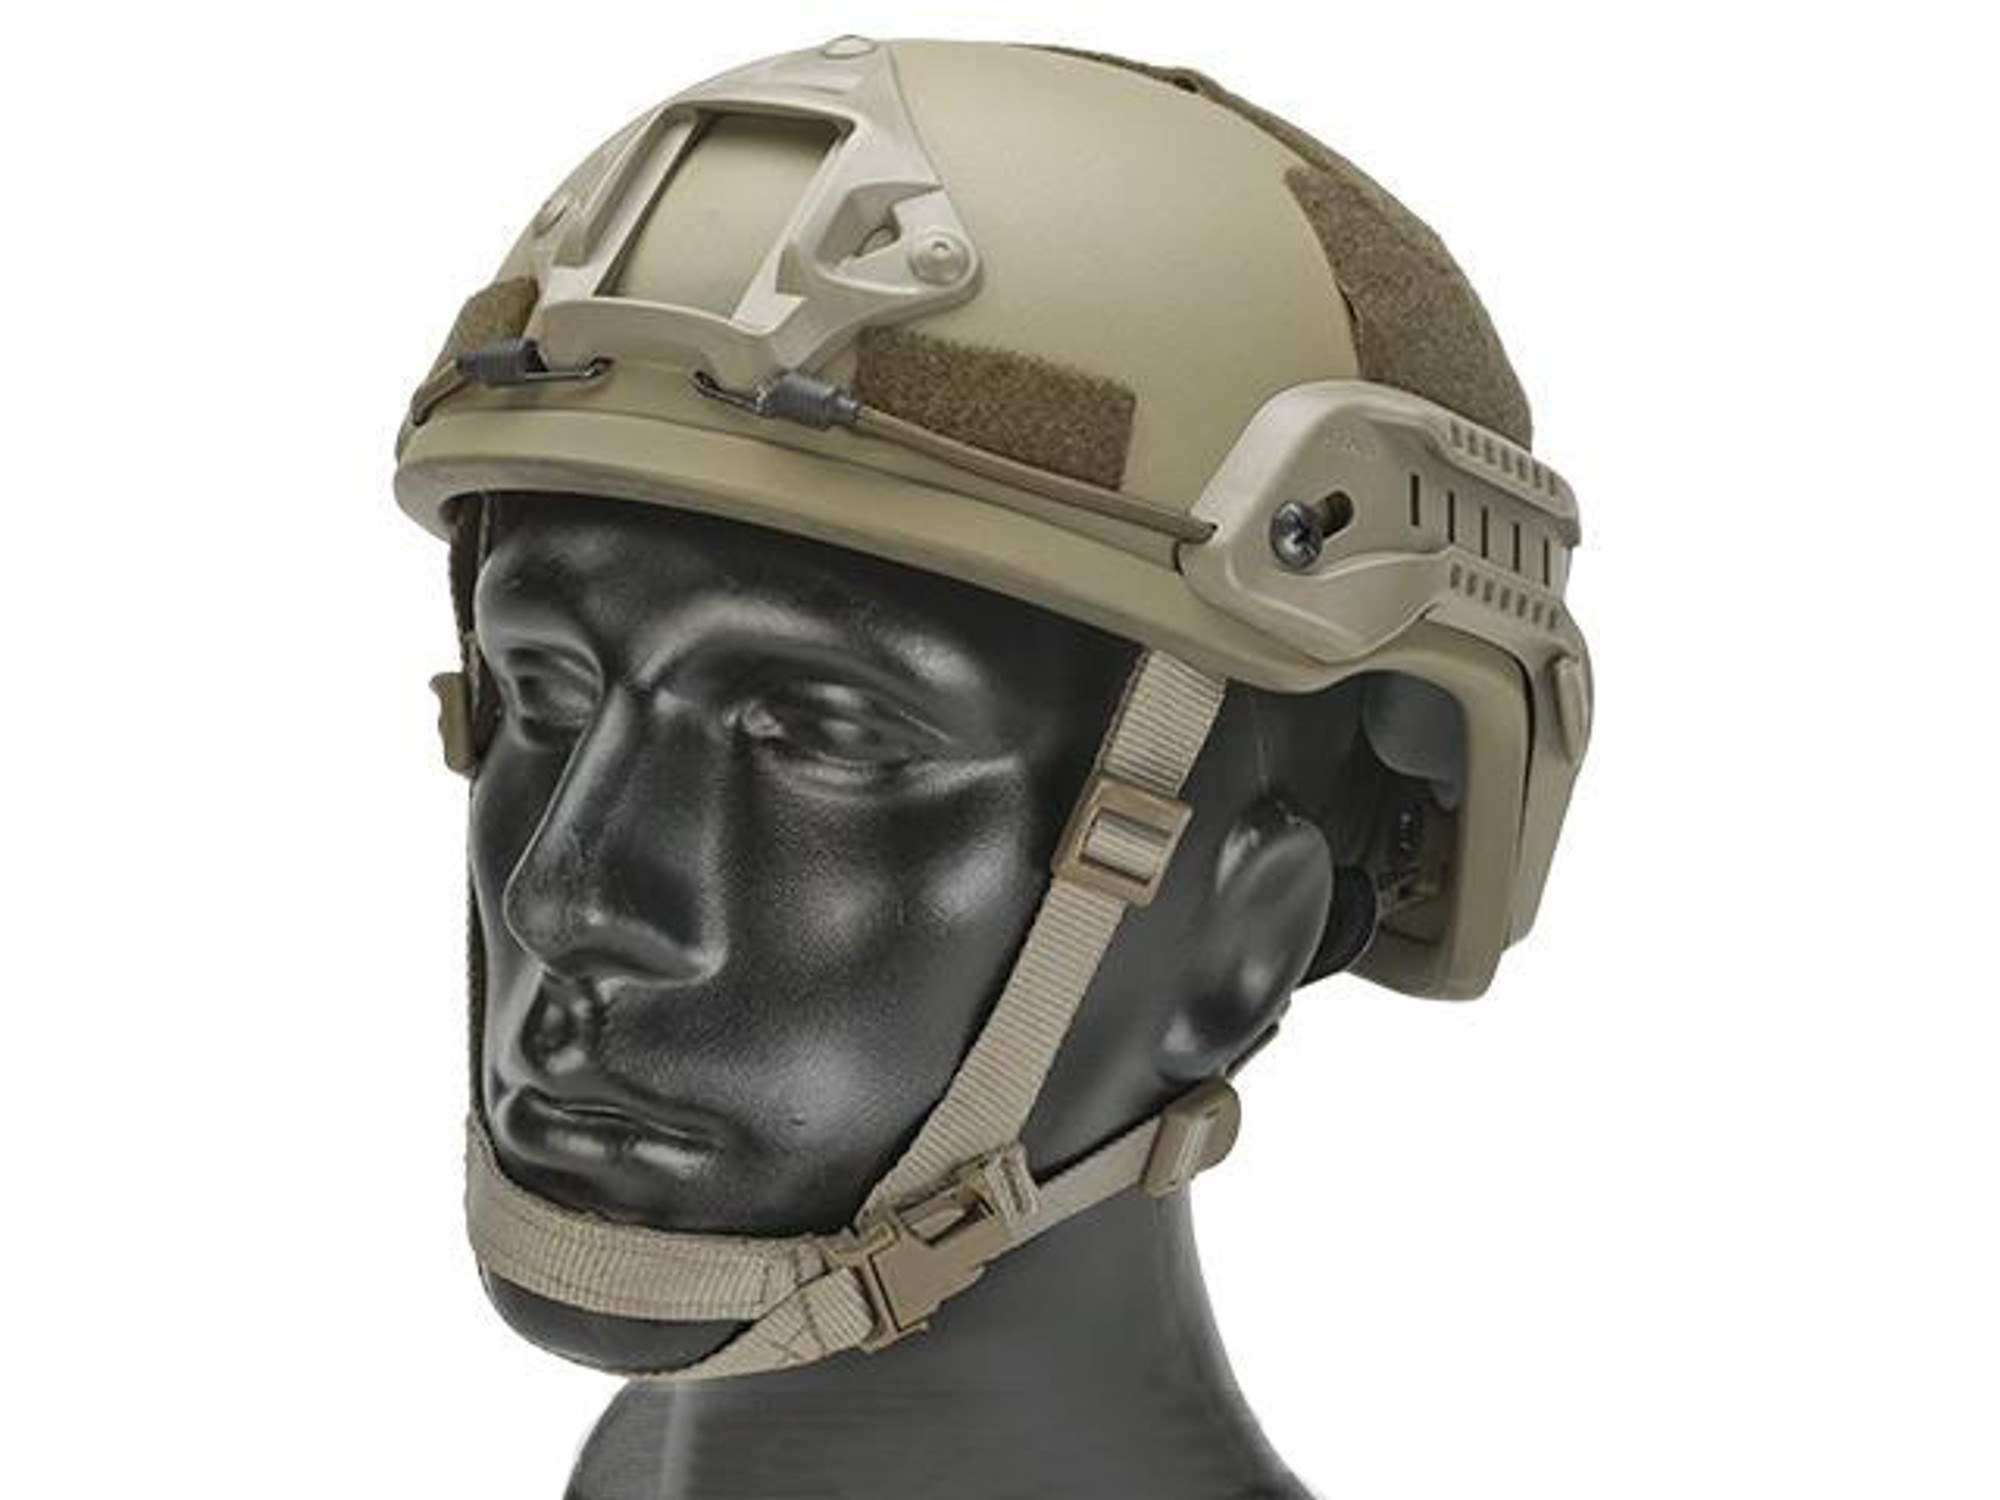 Mich 2001 Helmet w/ NVG Mount & Side Rail for Airsoft - Tan